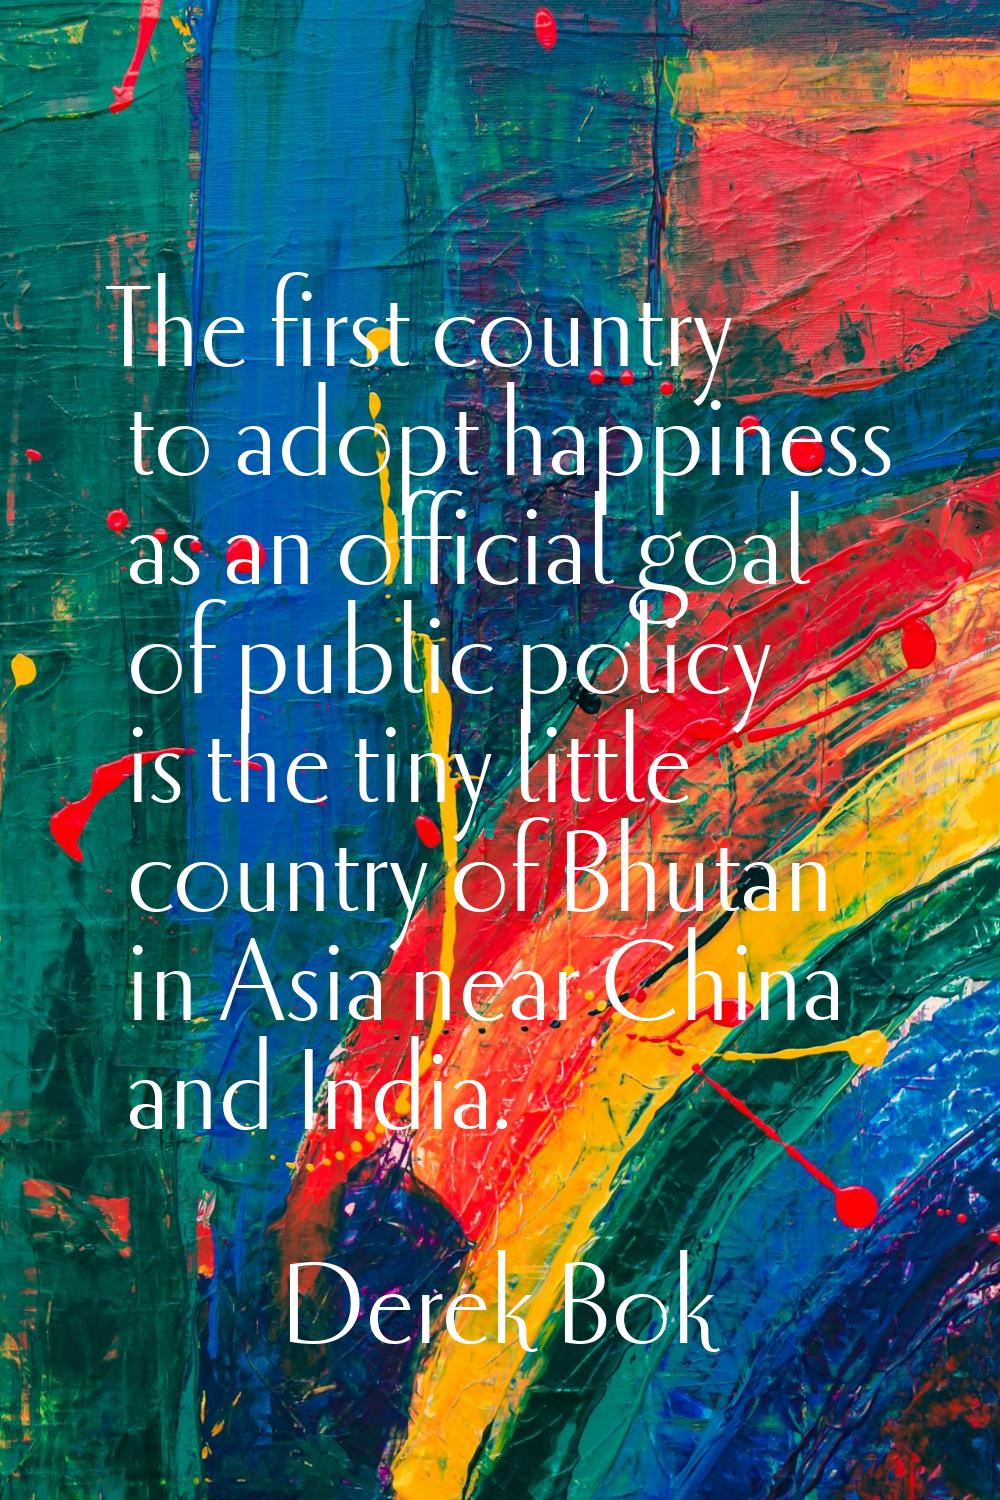 The first country to adopt happiness as an official goal of public policy is the tiny little countr